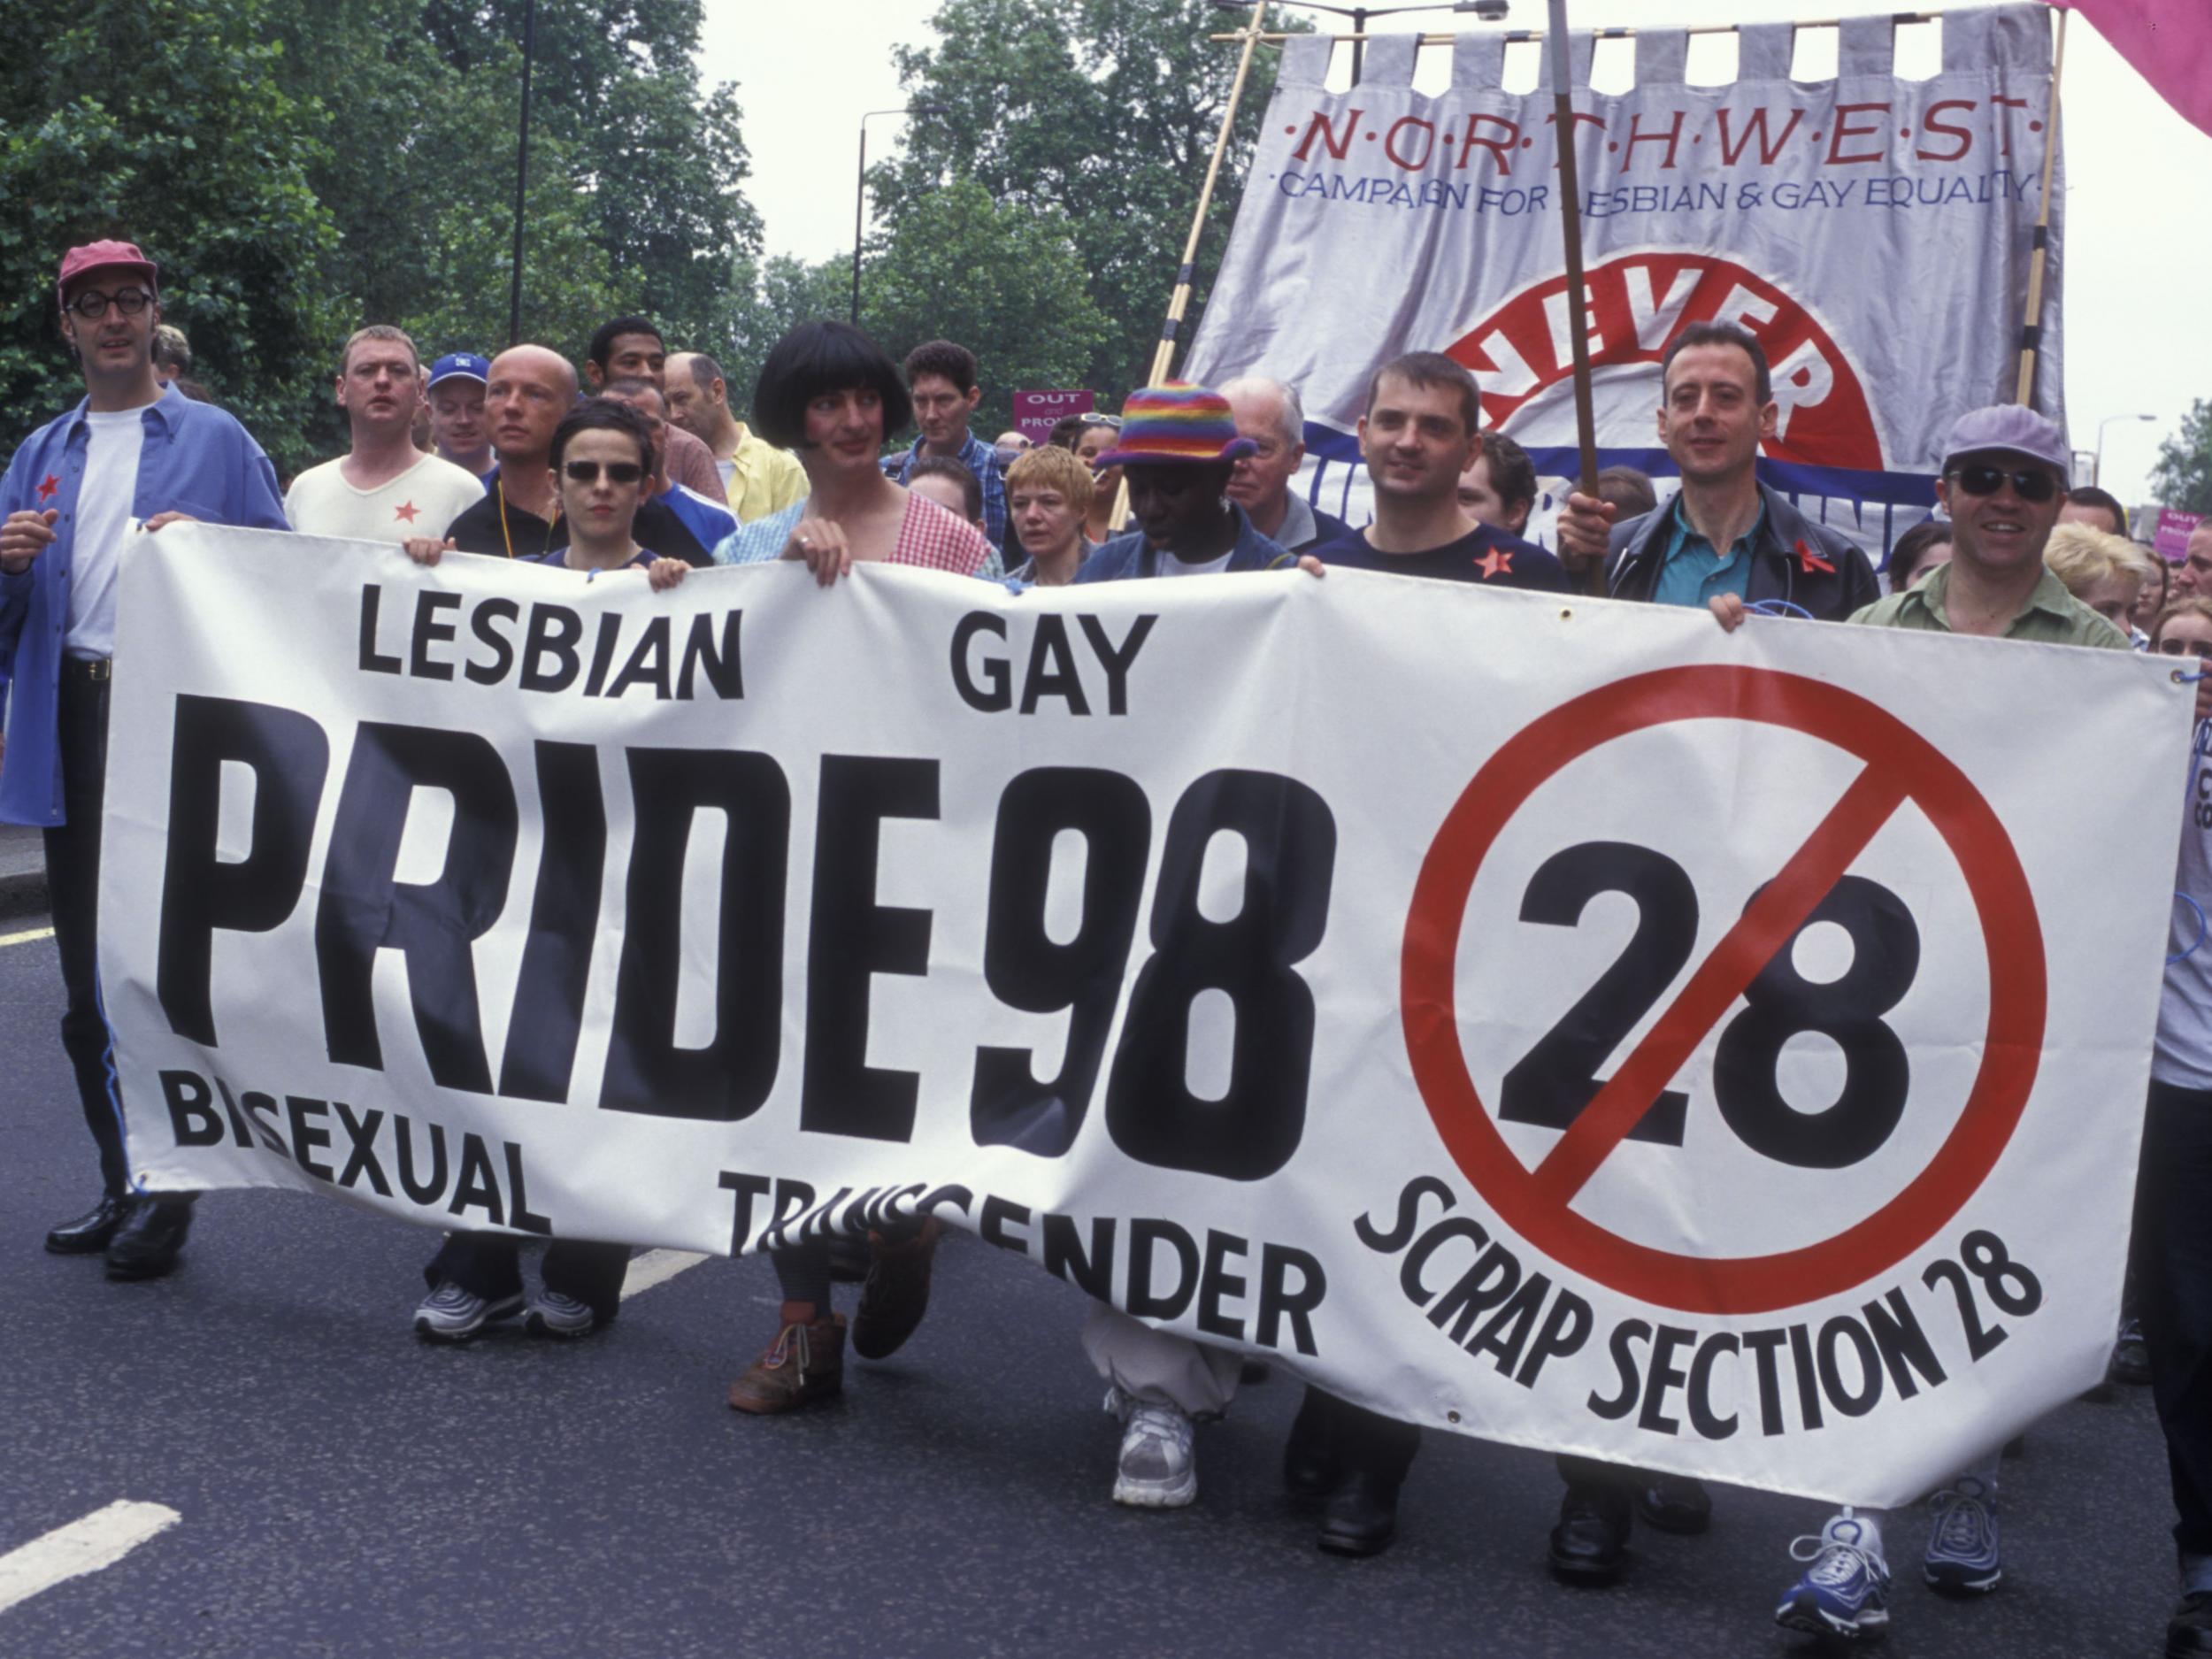 Protesters rally against the legislation in 1998, which was finally fully repealed in 2003